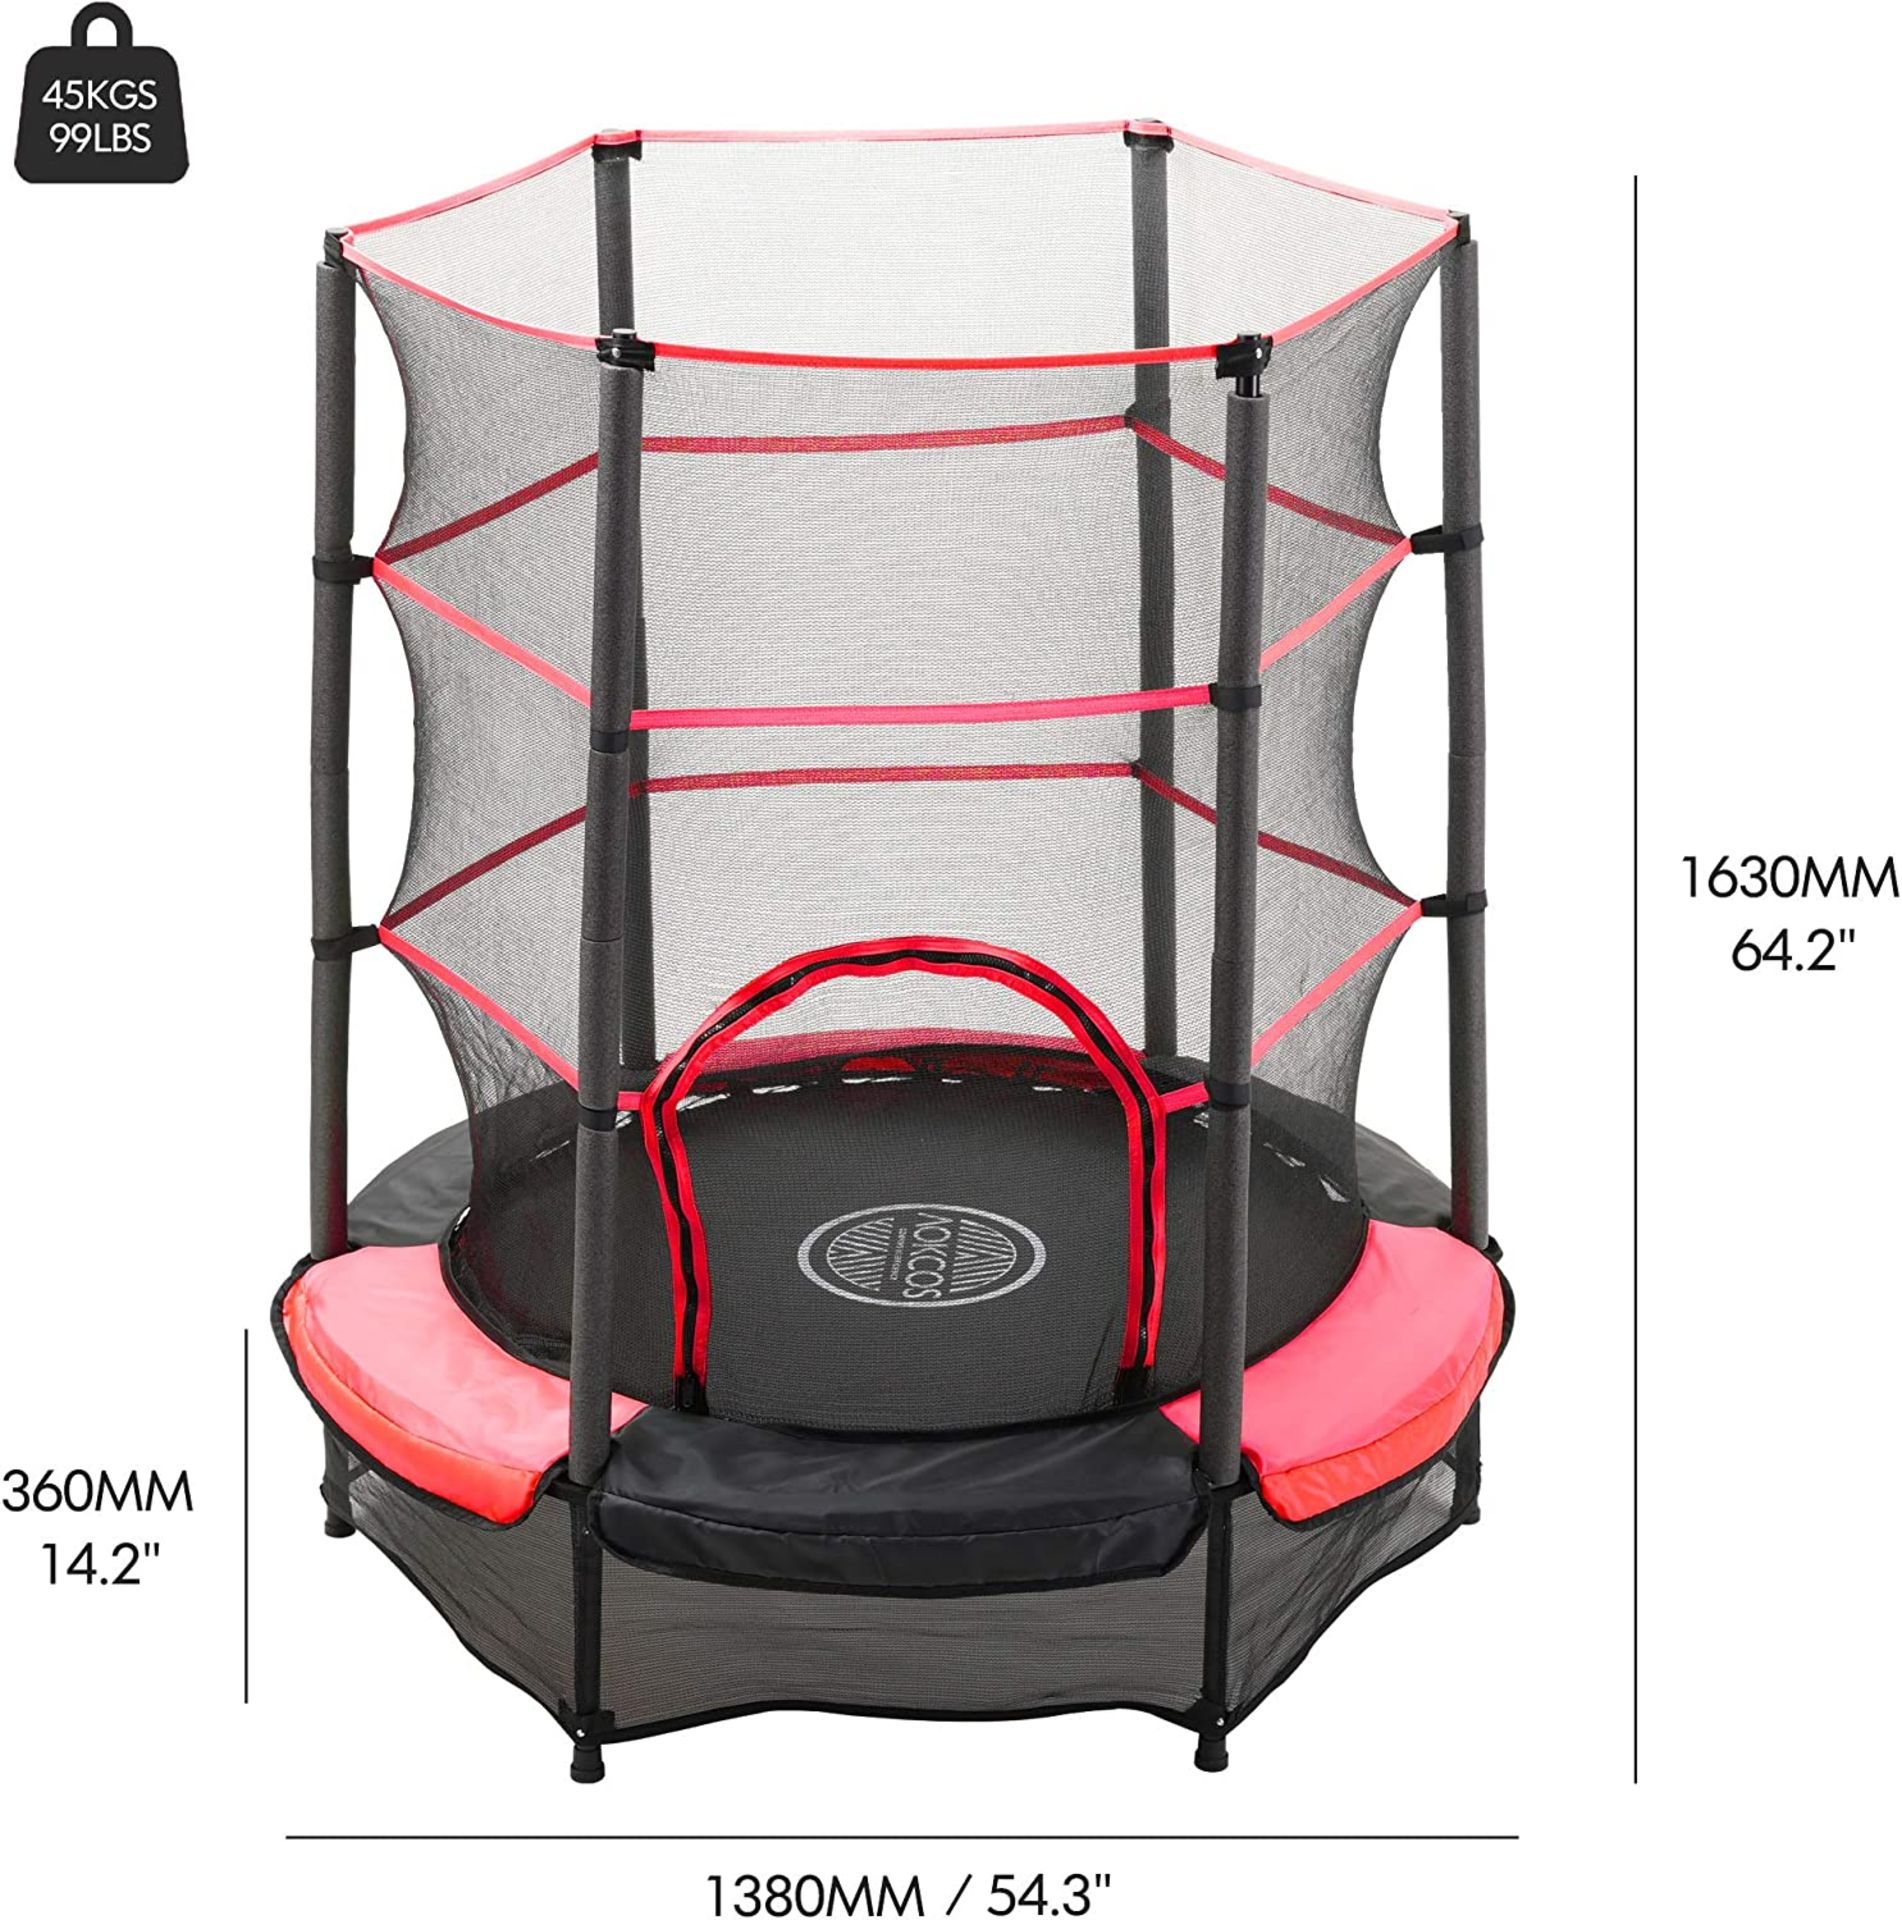 Brand new 54” Trampoline for Kids, Mini Toddler Trampoline with Safety Enclosure, Indoor & Outdoor